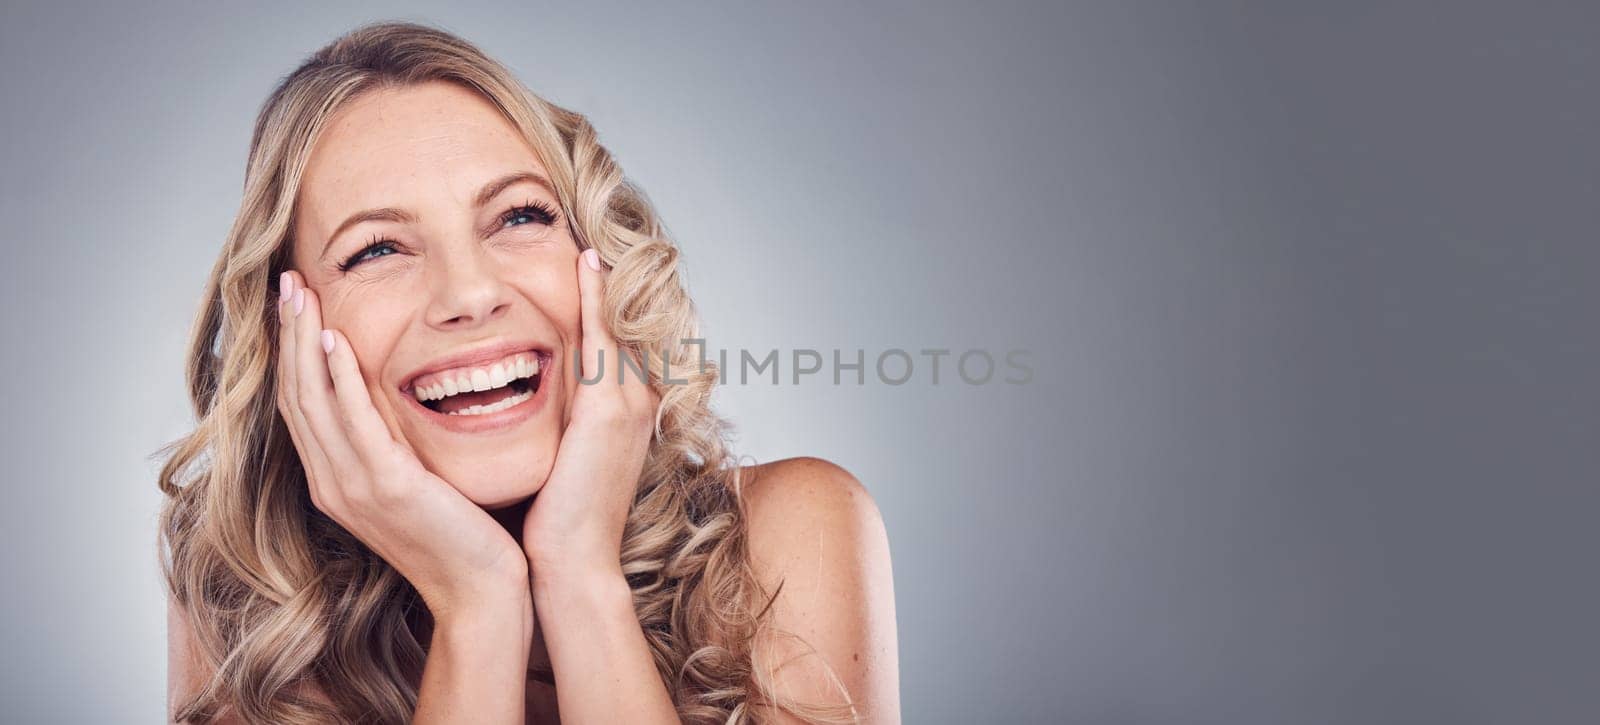 Beauty, happy and face of woman excited for cosmetics product placement, luxury makeup mockup or skincare glow. Dermatology mock up, spa studio or laughing promotion model isolated on grey background.